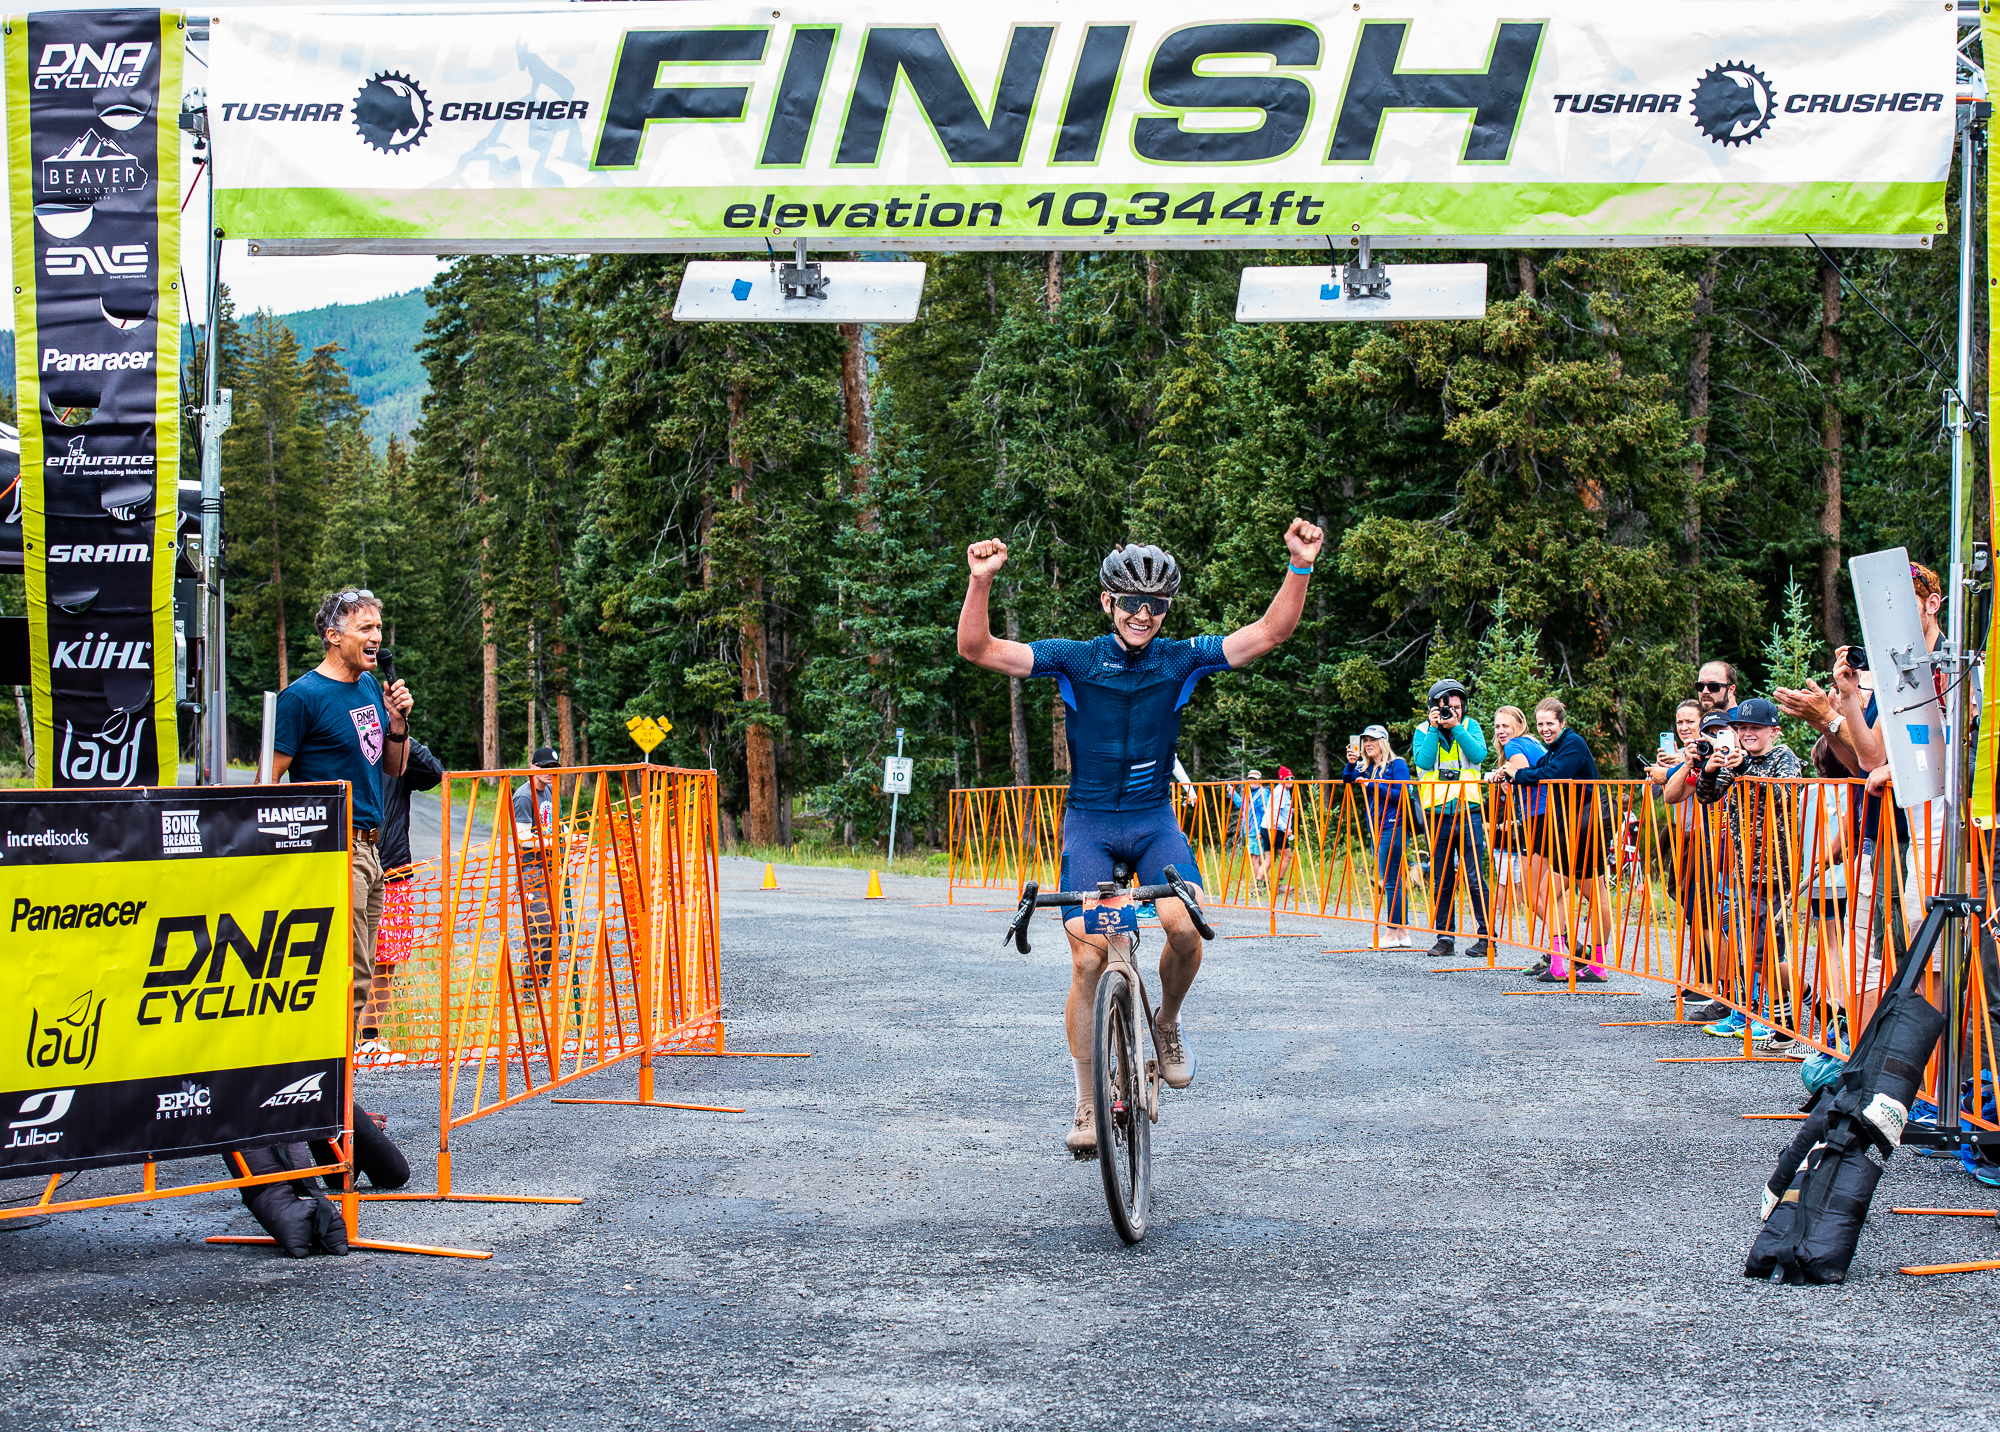 Zach Calton takes a solo win in his first attempt. 2018 Crusher in the Tushar. PC: Steven L. Sheffield